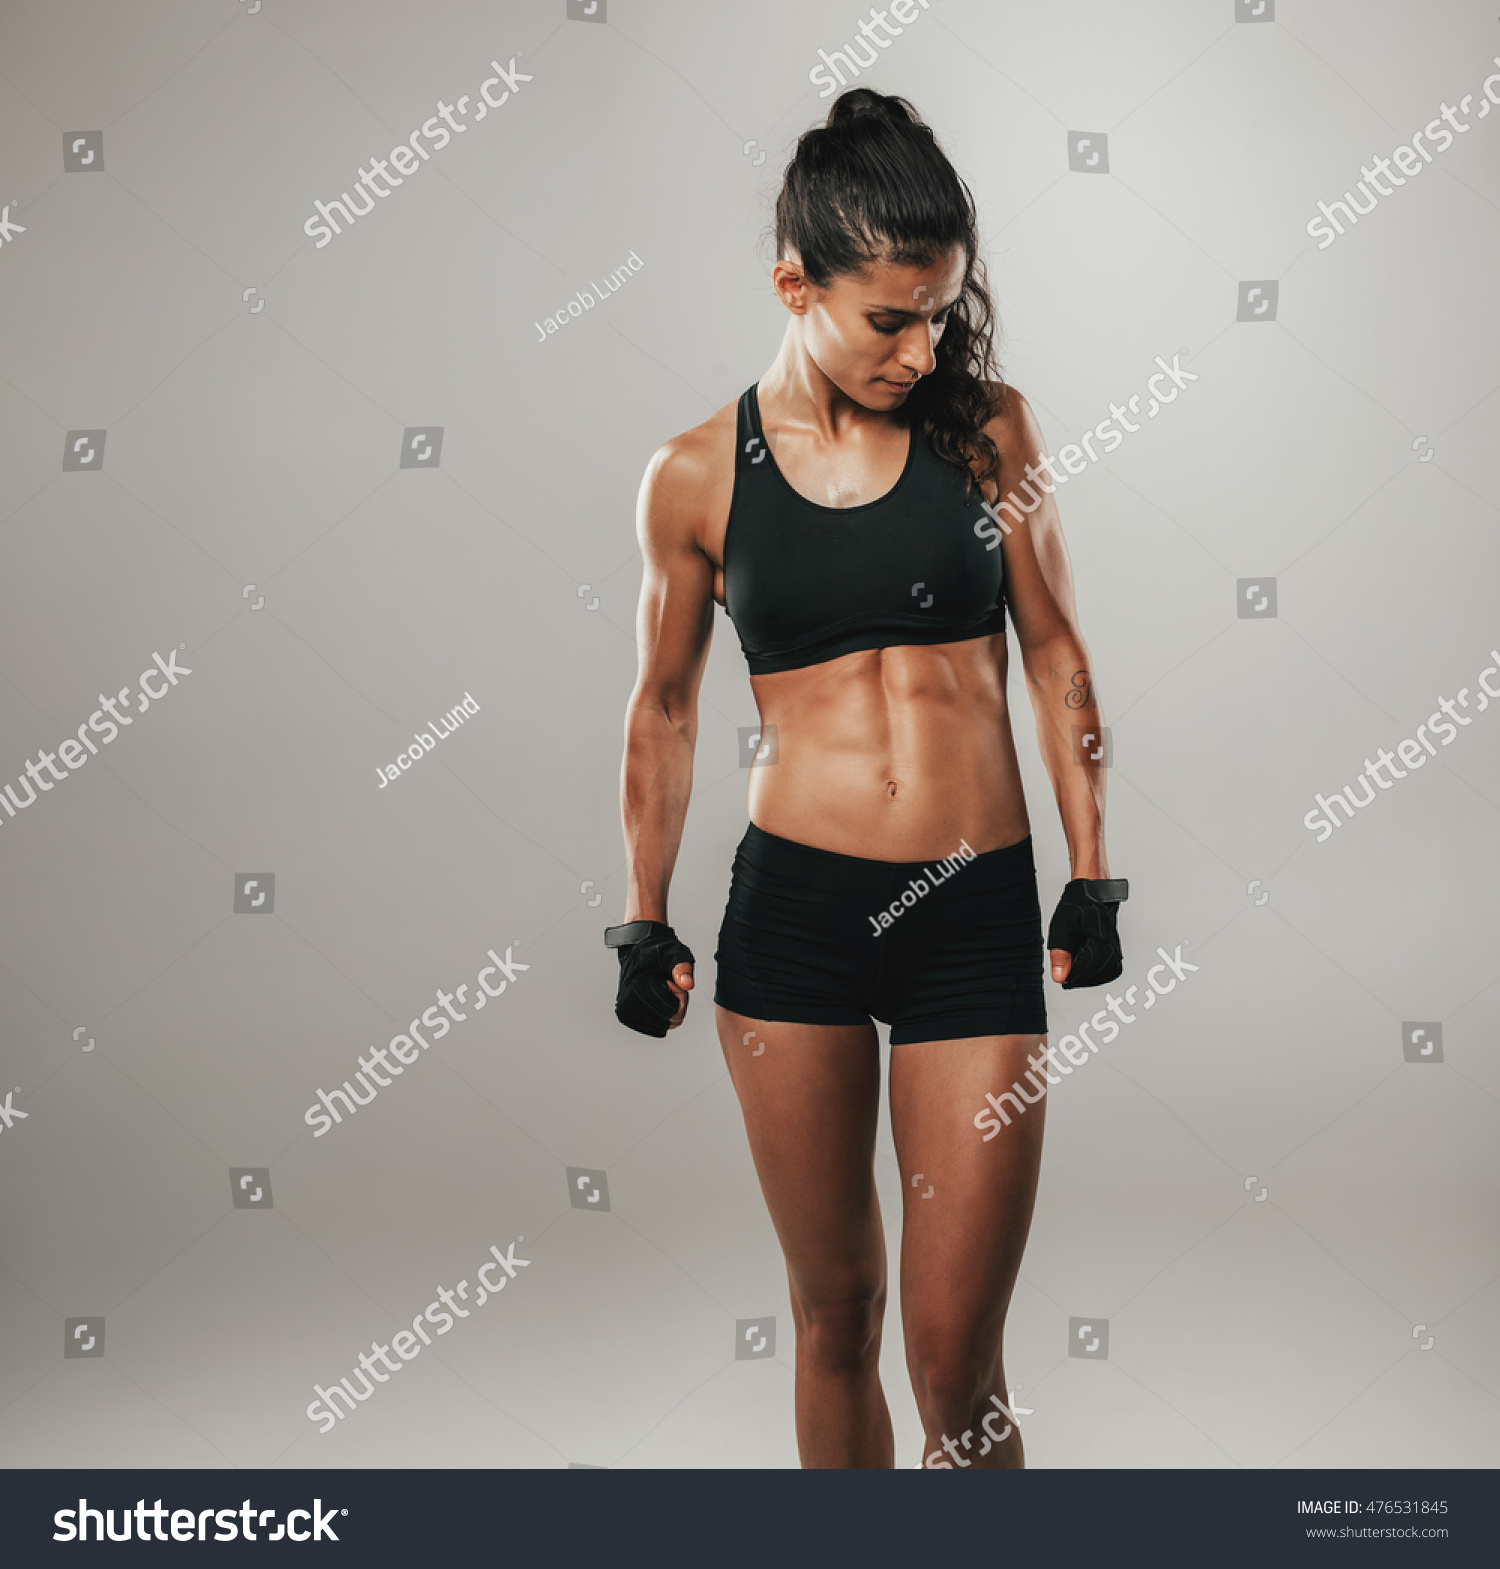 Strong Fit Athletic Young Woman Wearing Stock Photo 476531845 ...